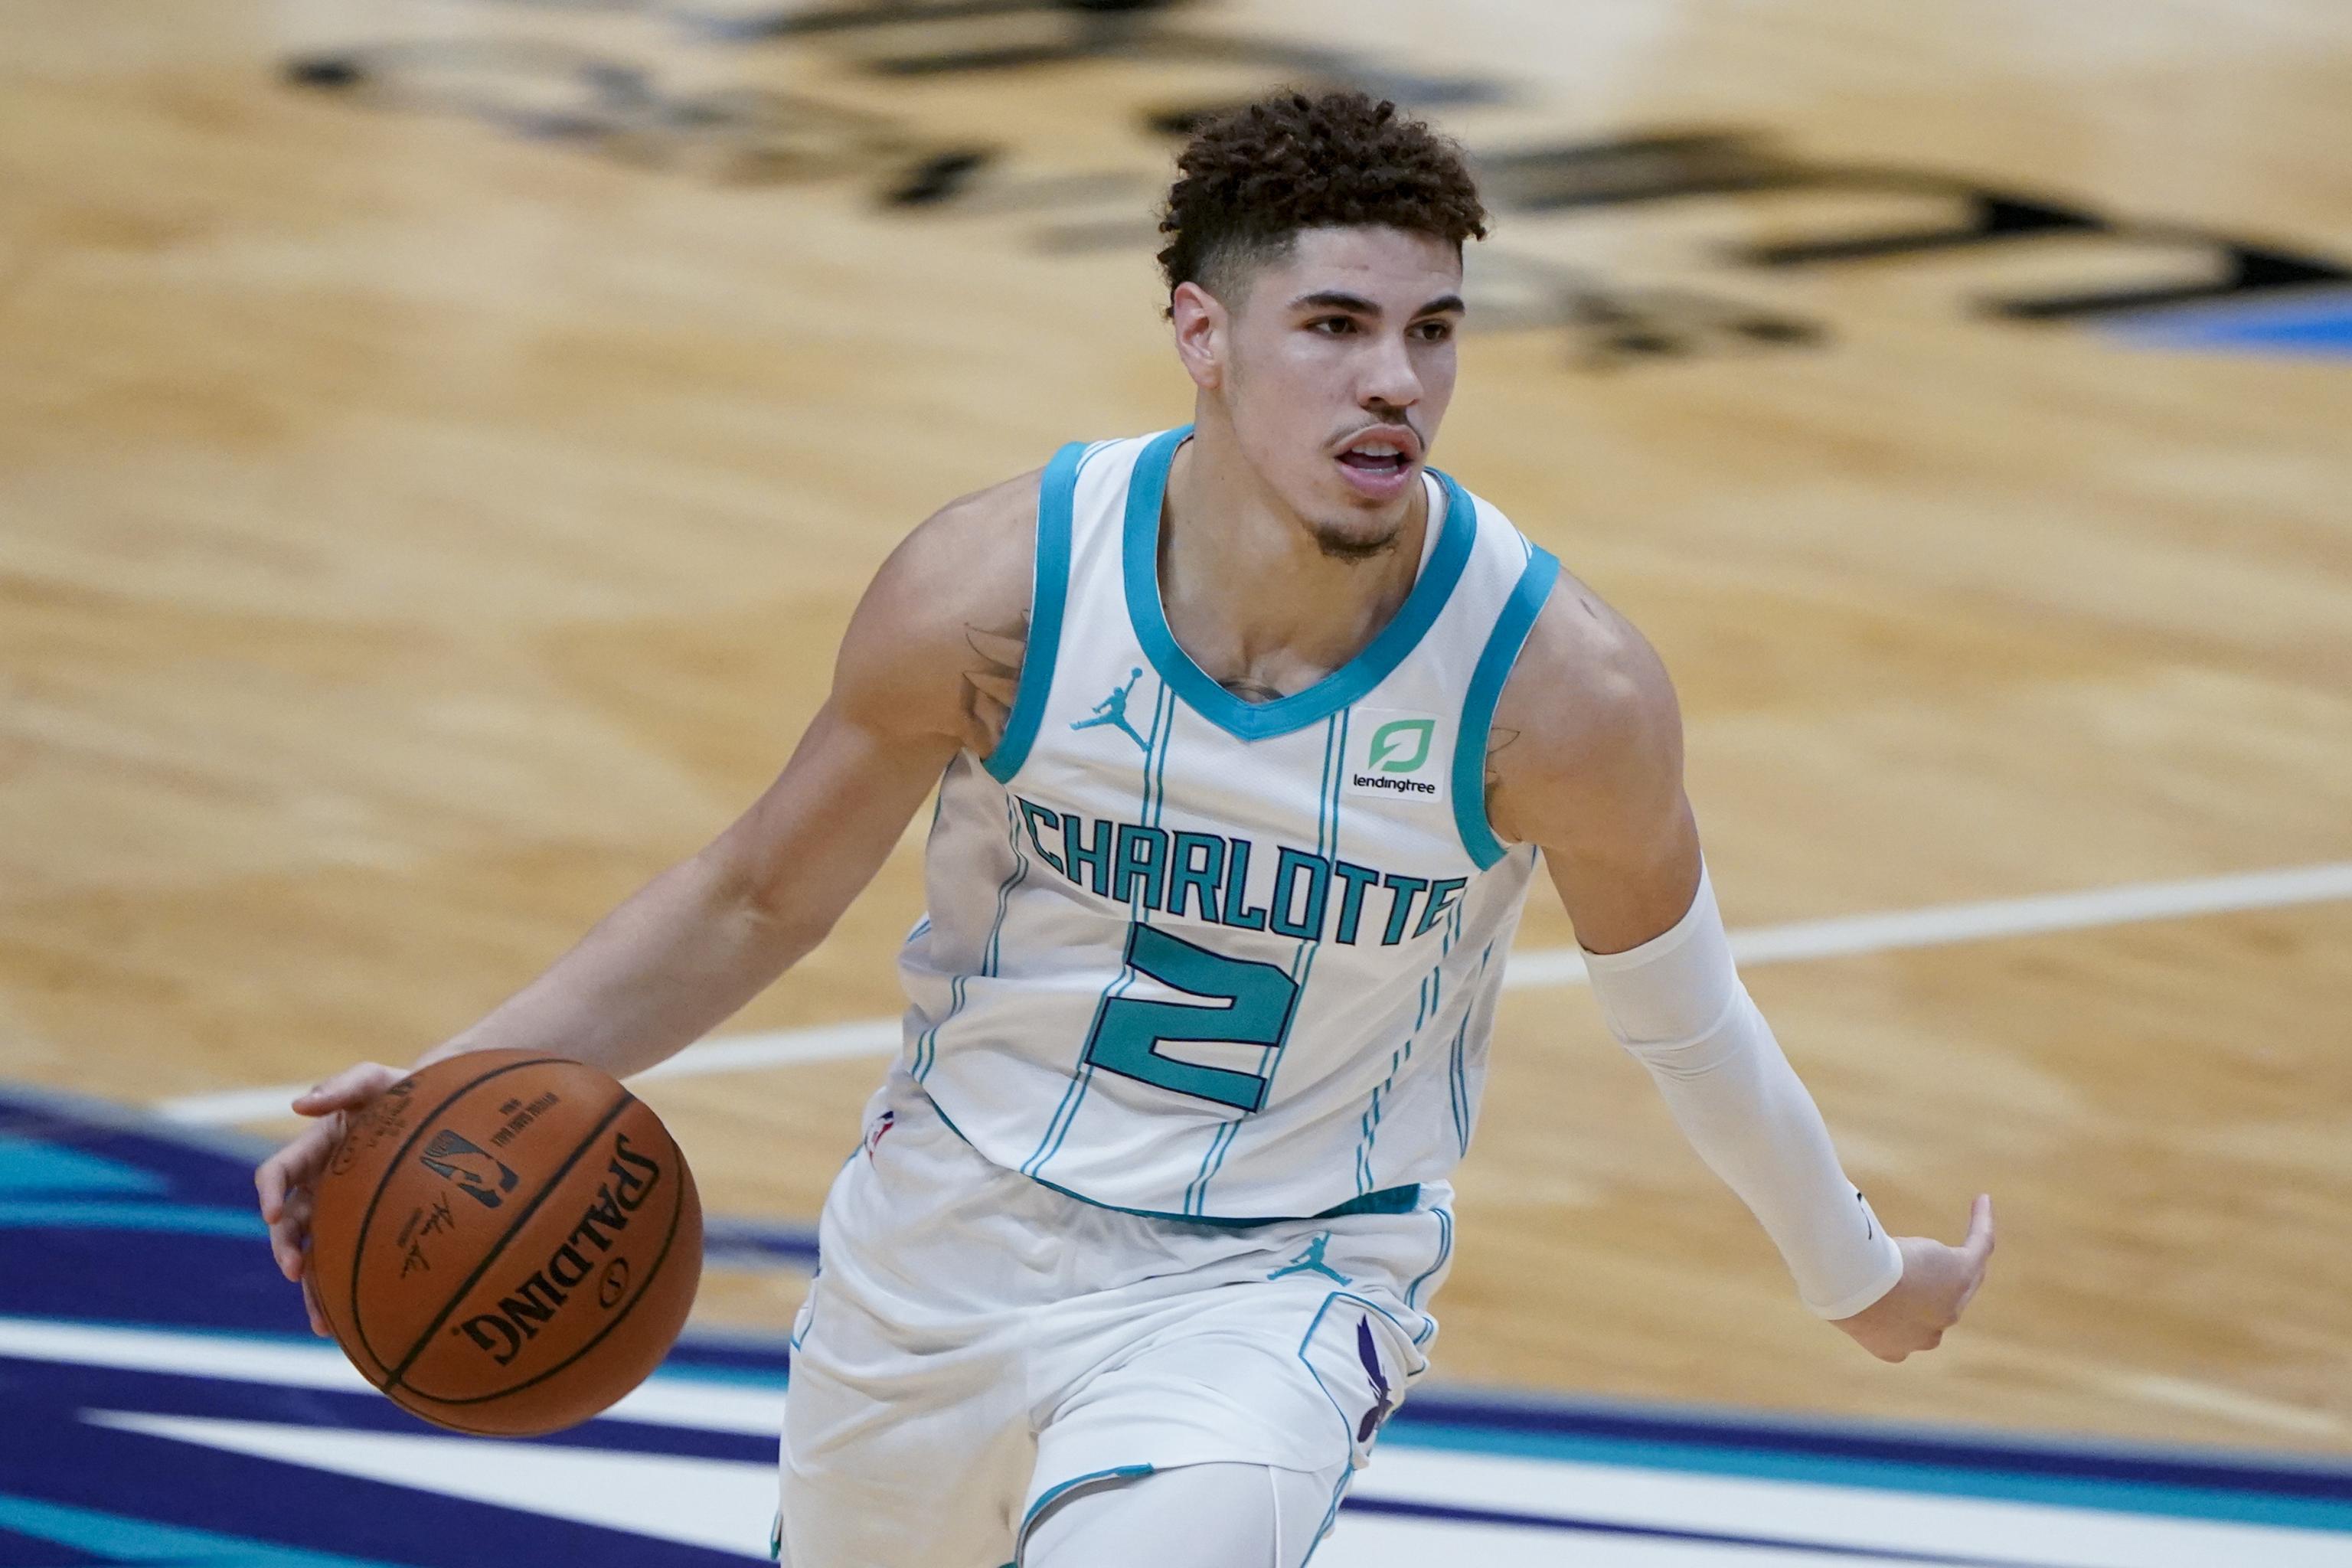 2020 21 Nba Rookie Of Year Odds Lamelo Ball Obi Toppin Early Betting Favorites Bleacher Report Latest News Videos And Highlights